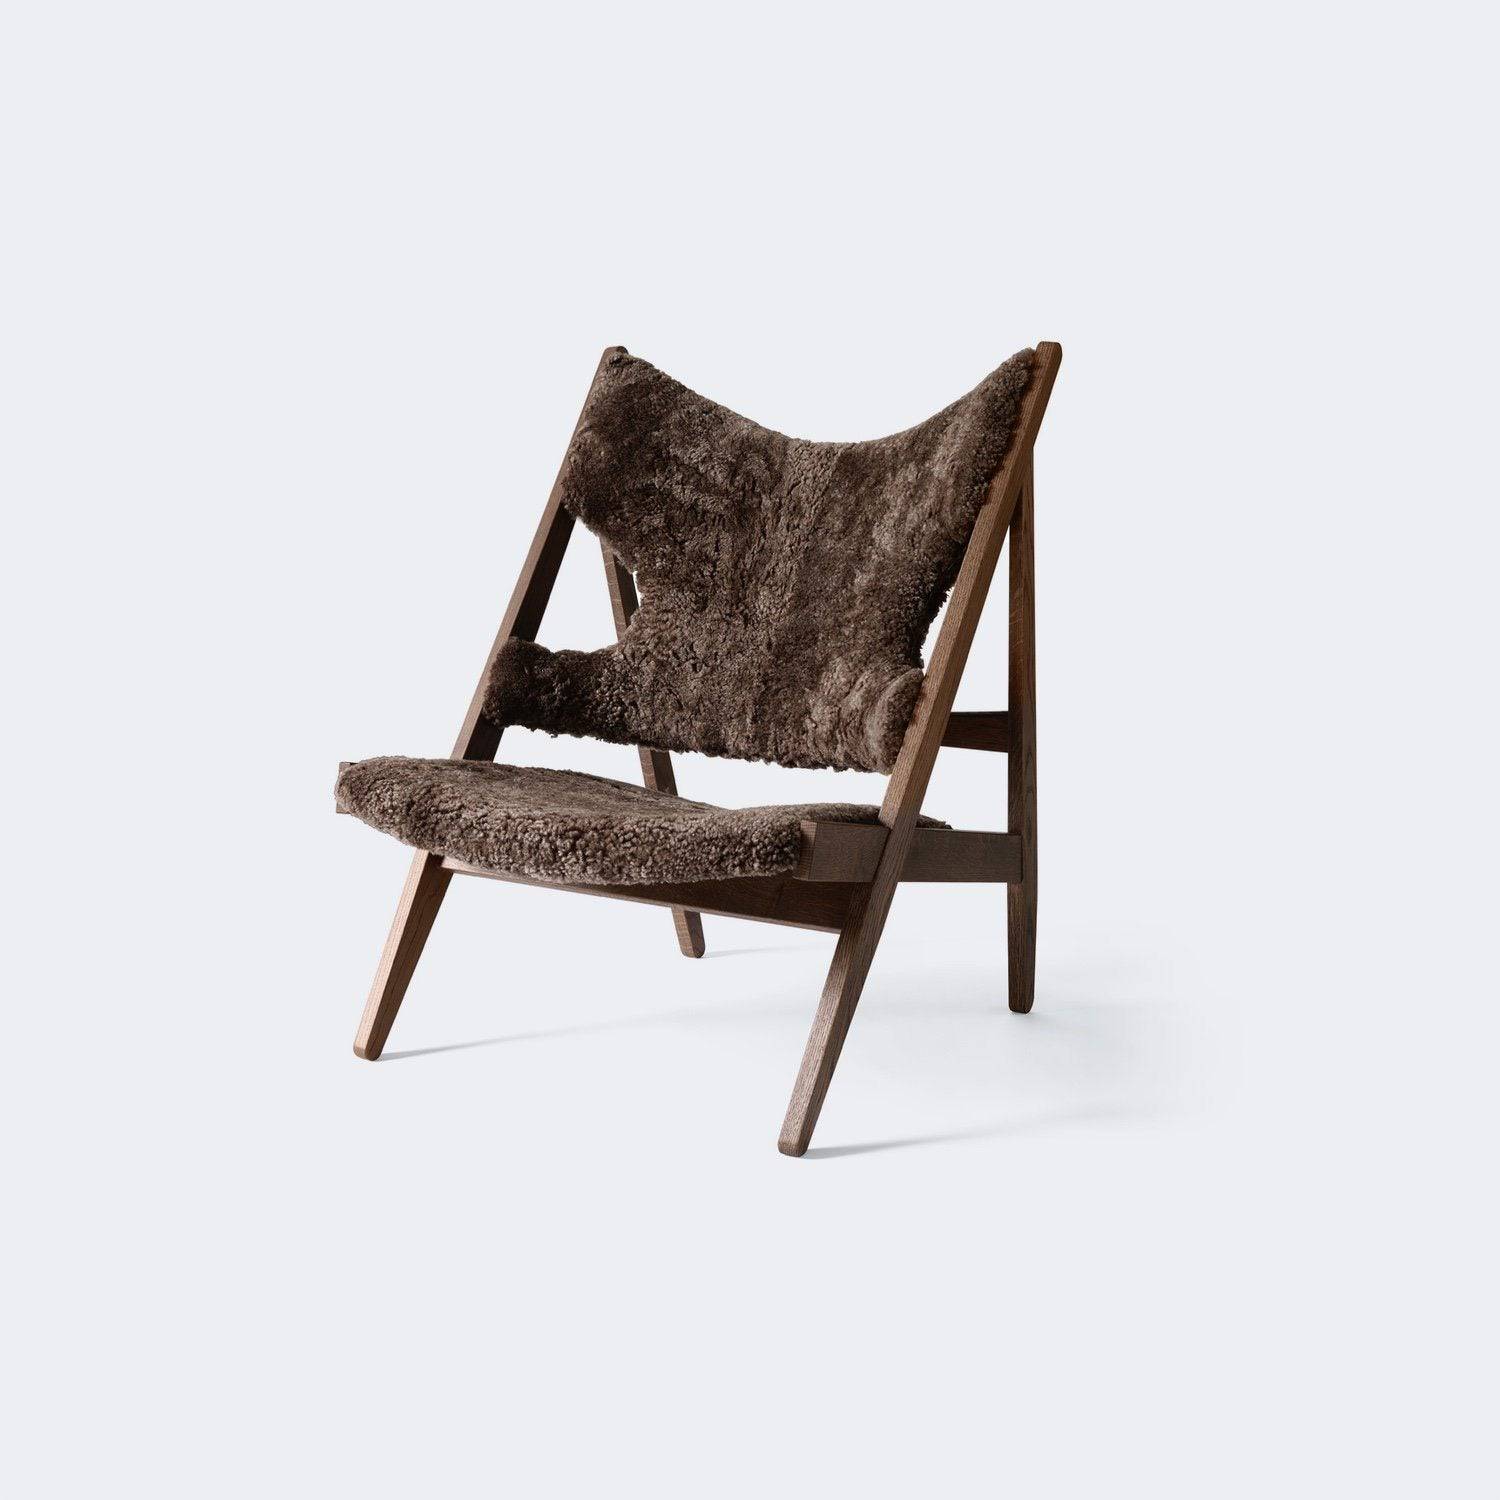 Audo Copenhagen Knitting Chair, Sheepskin Upholstery Made To Order Dark Stained Oak/Root, (Dark Brown) - KANSO#Frame/Fabric Color_Dark Stained Oak/Root